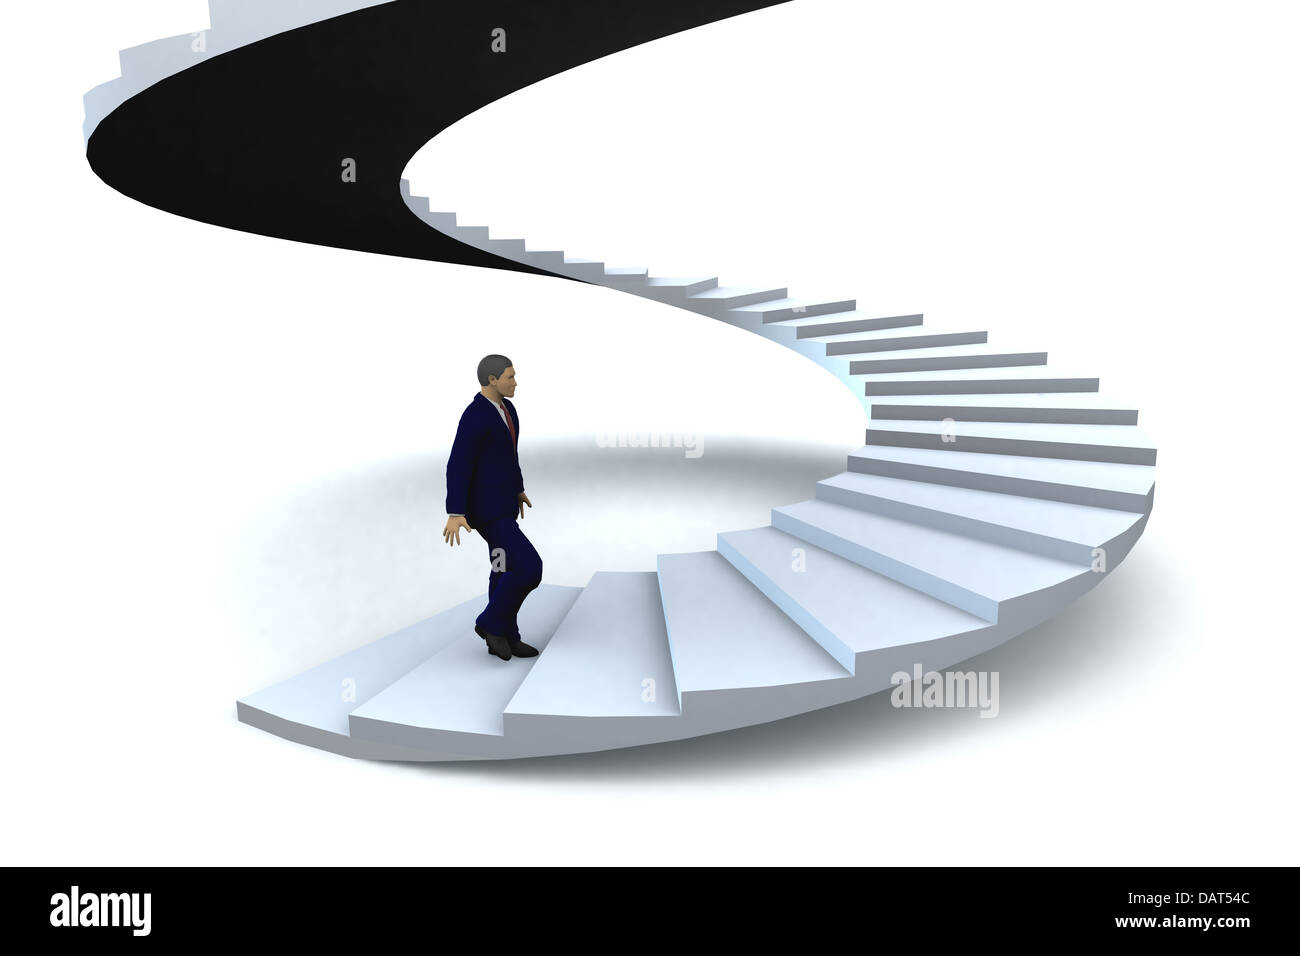 Stairway to heaven/success stock image. Image of road - 25793241